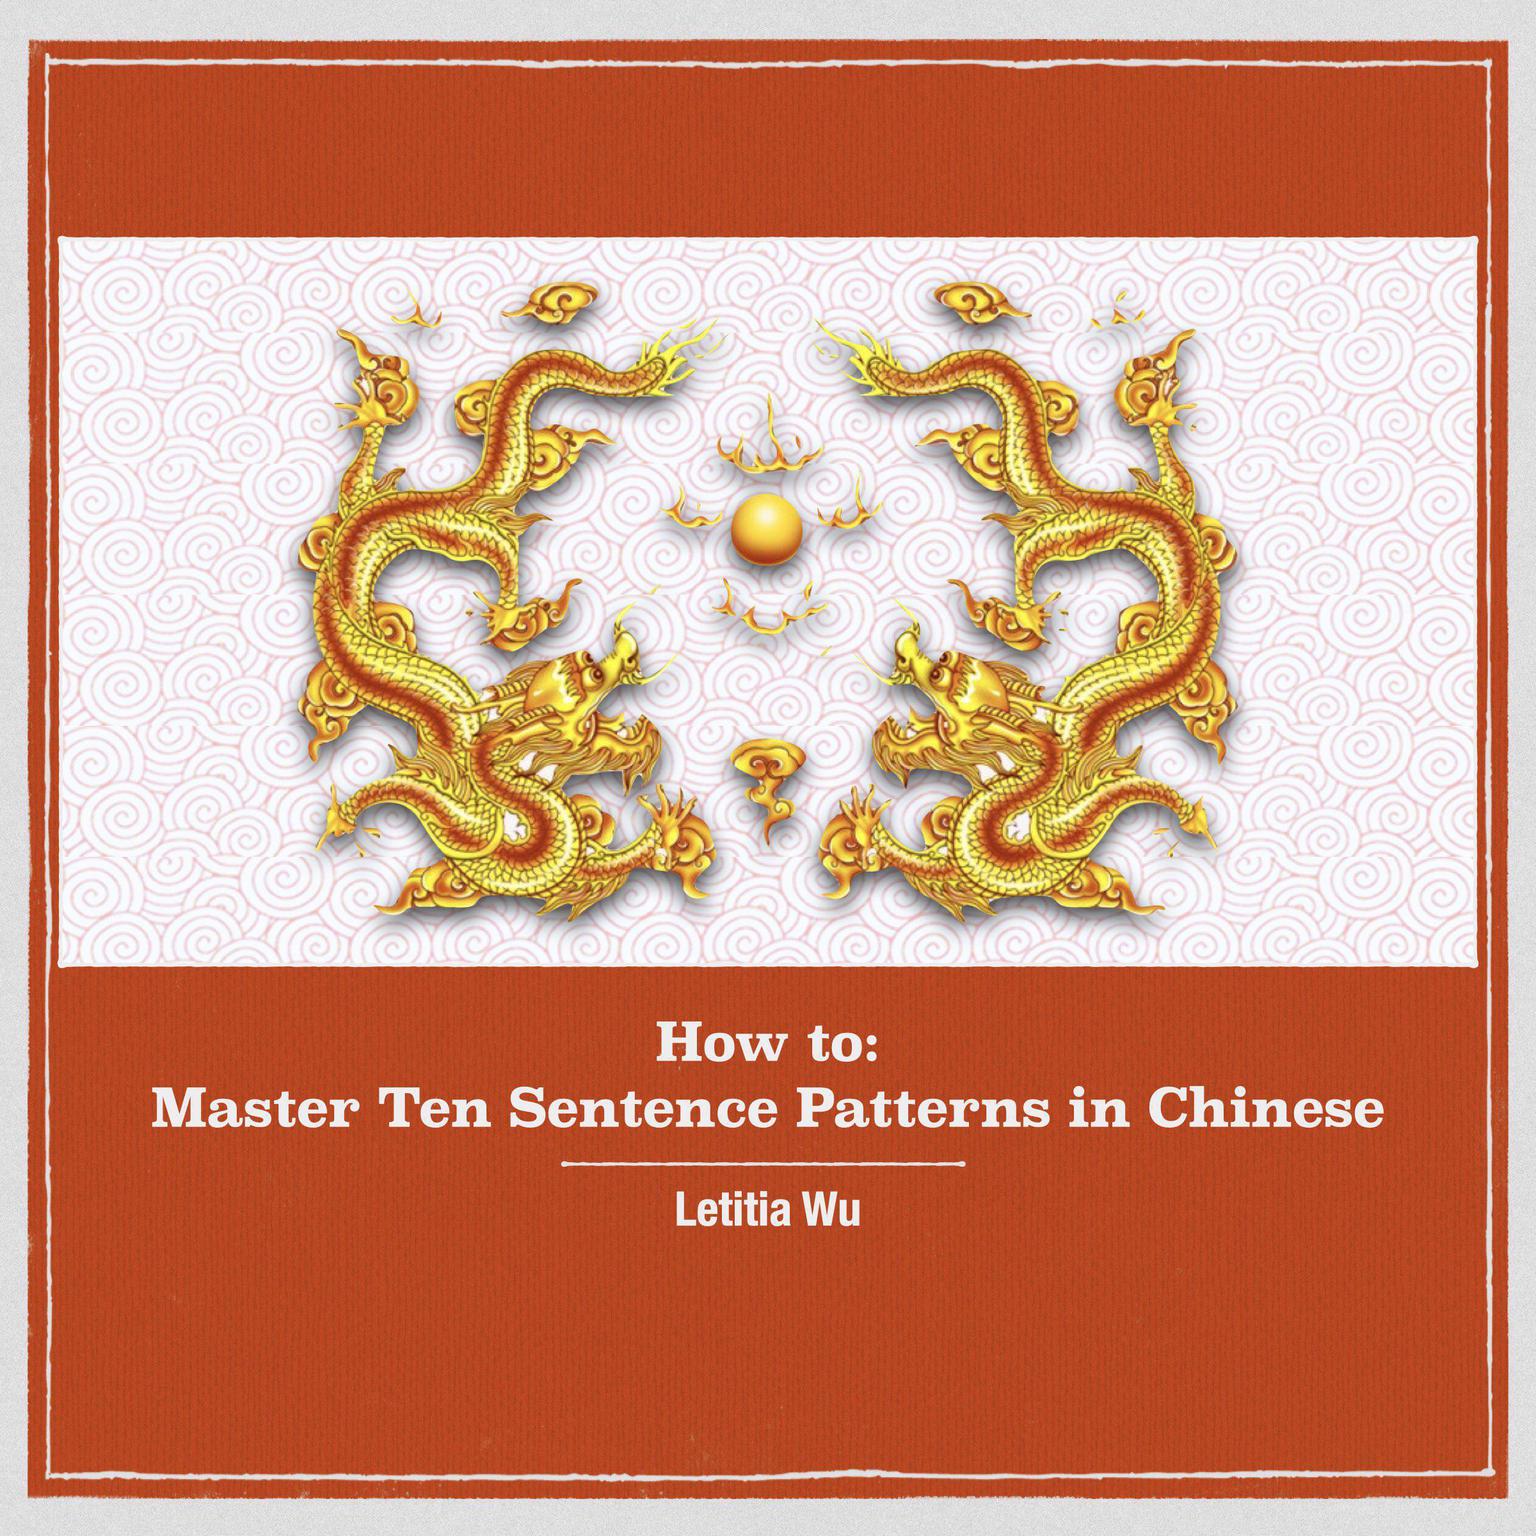 How to: Master 10 Sentence Patterns in Chinese: Learning Chinese through massive practice. Audiobook, by Letitia Wu